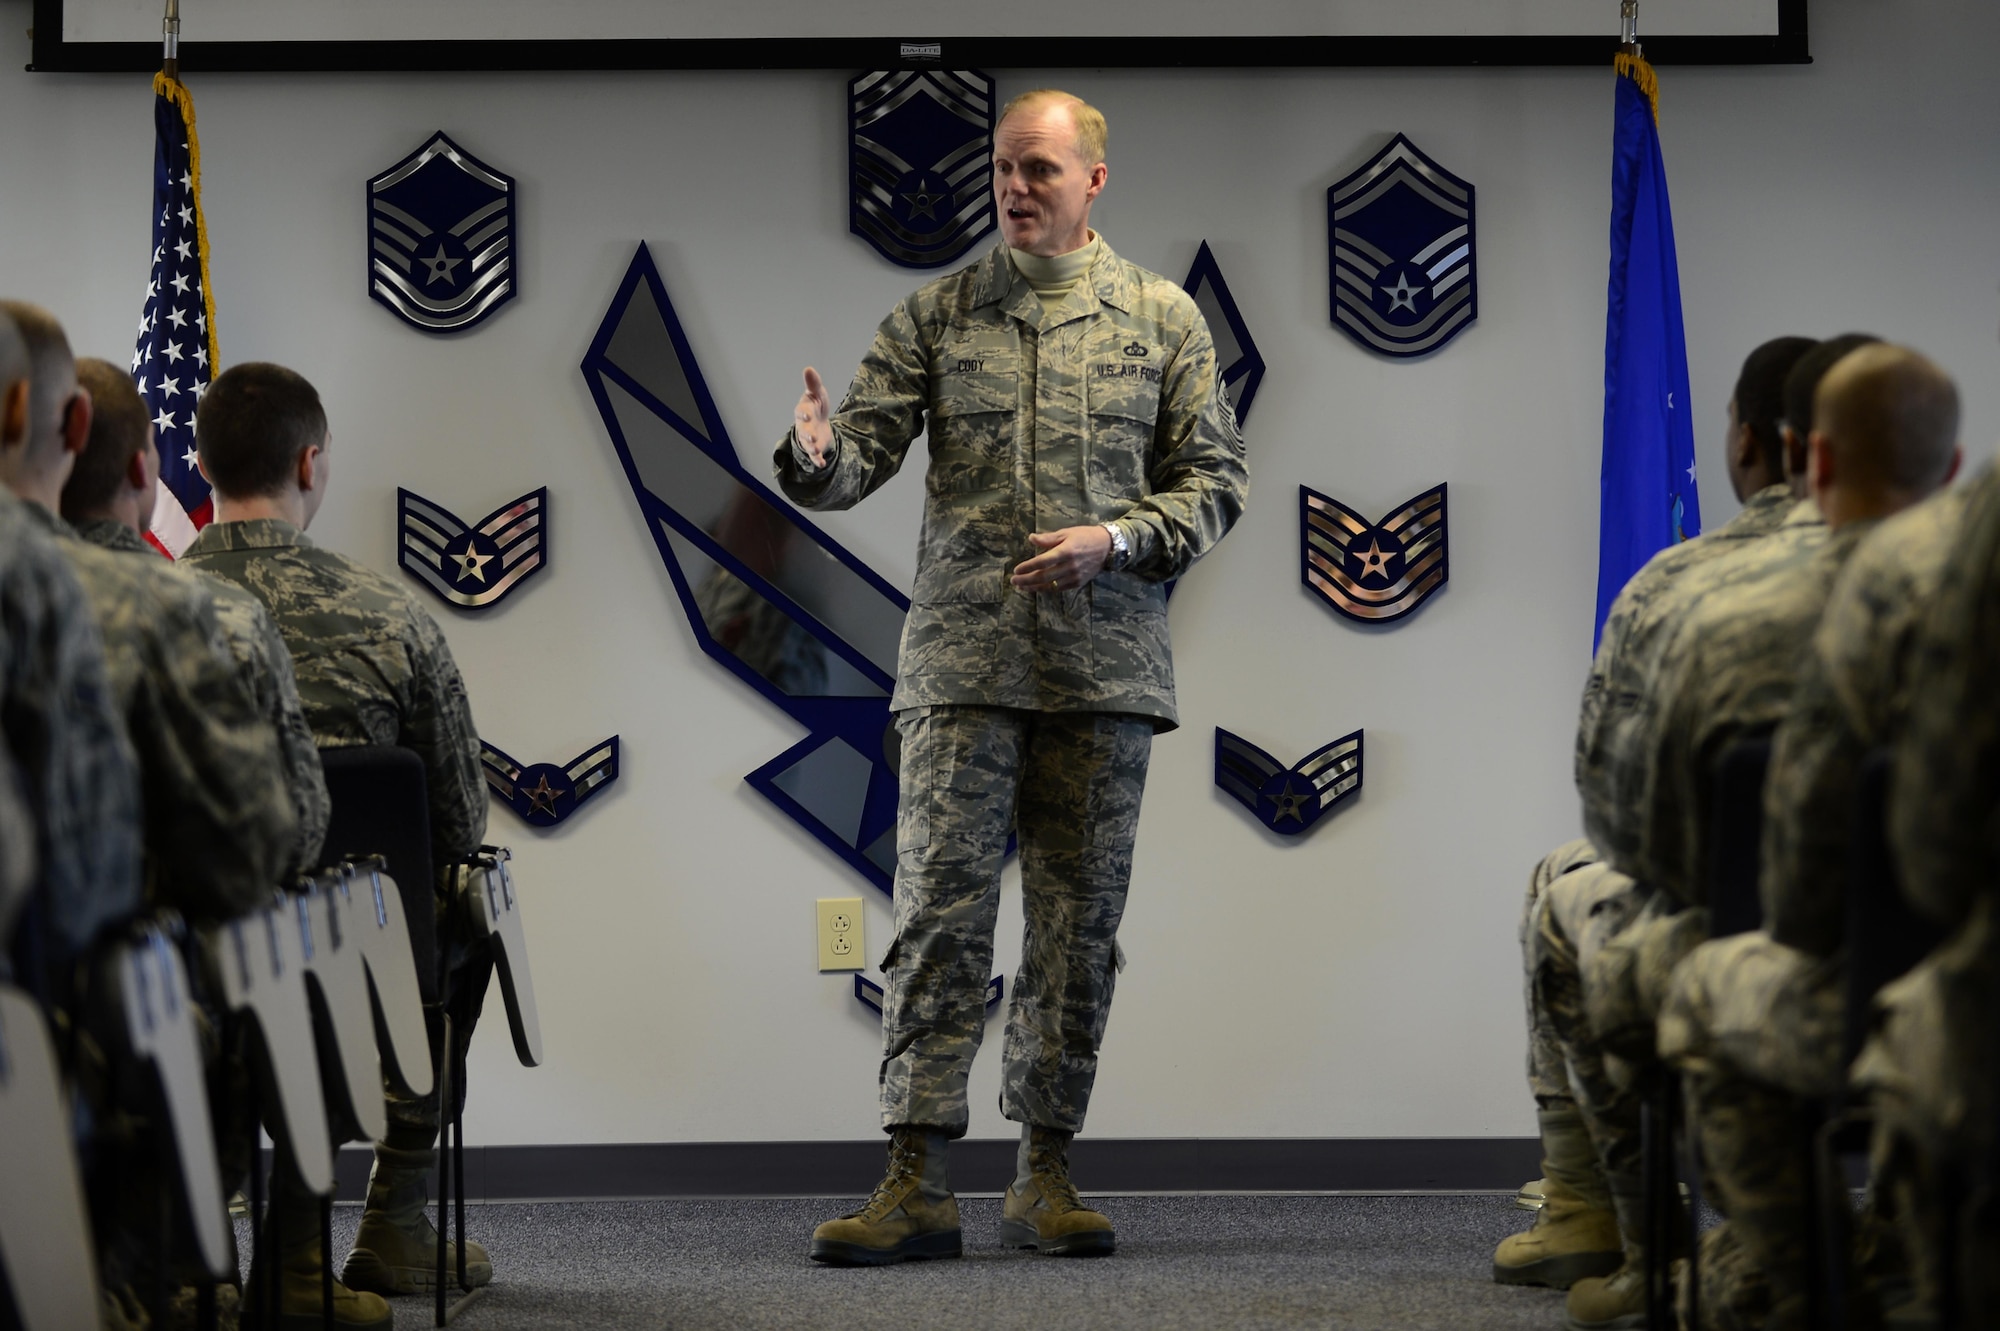 Chief Master Sgt. of the Air Force James A. Cody speaks to Airmen at the First Term Airman Center Jan. 7, 2014, during his visit to Langley Air Force Base, Va, Cody visited multiple wings and discussed force management issues, budget concerns and the future of the enlisted force with Airmen. (U.S. Air Force photo/Airman 1st Class Areca T. Wilson)